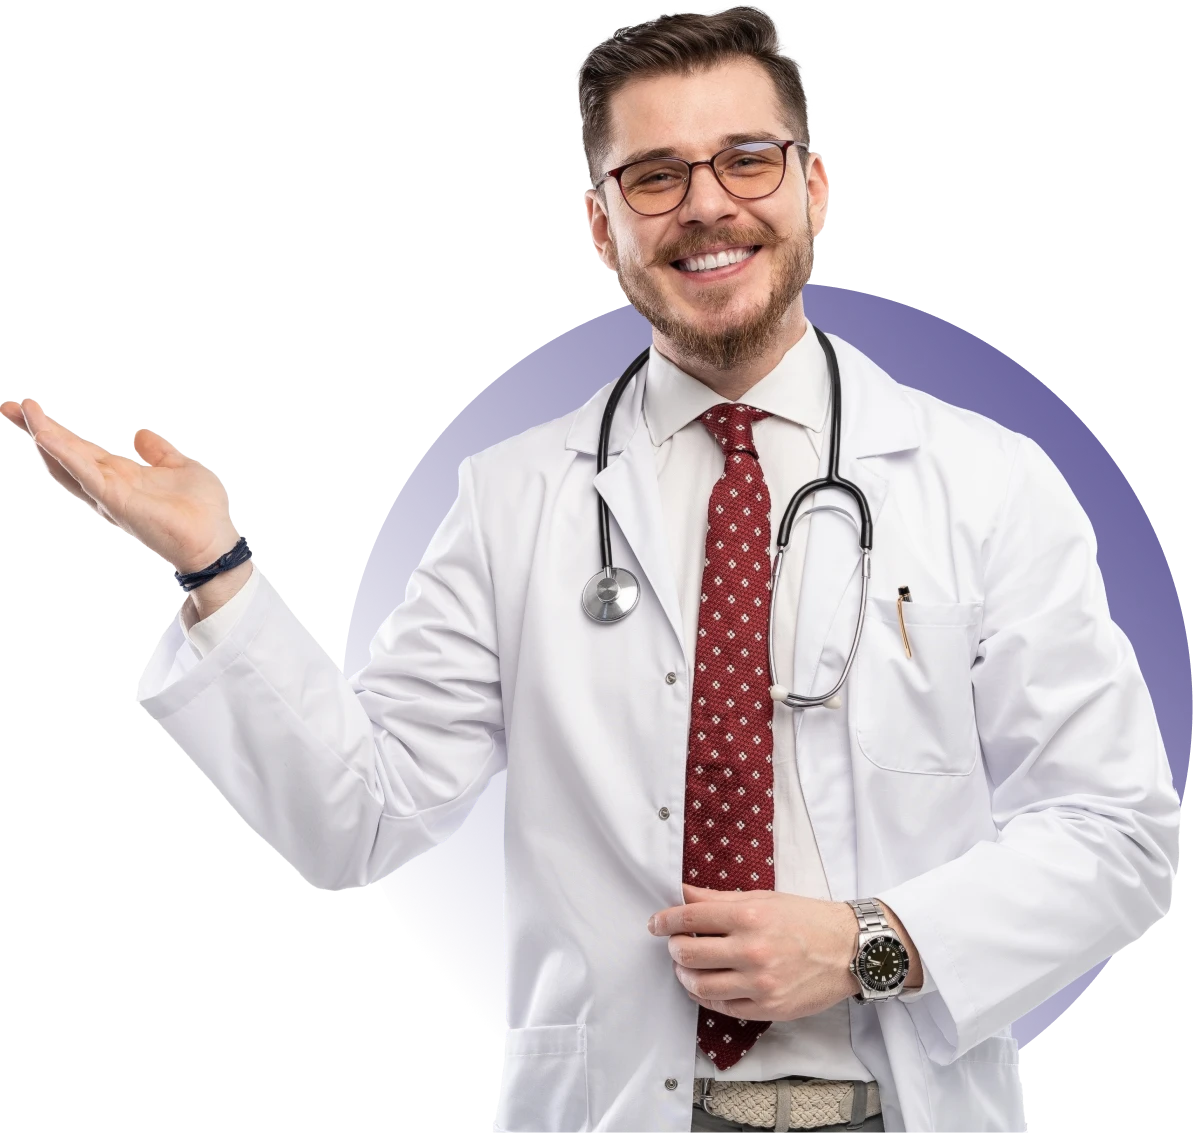 Physician Credentialing Company